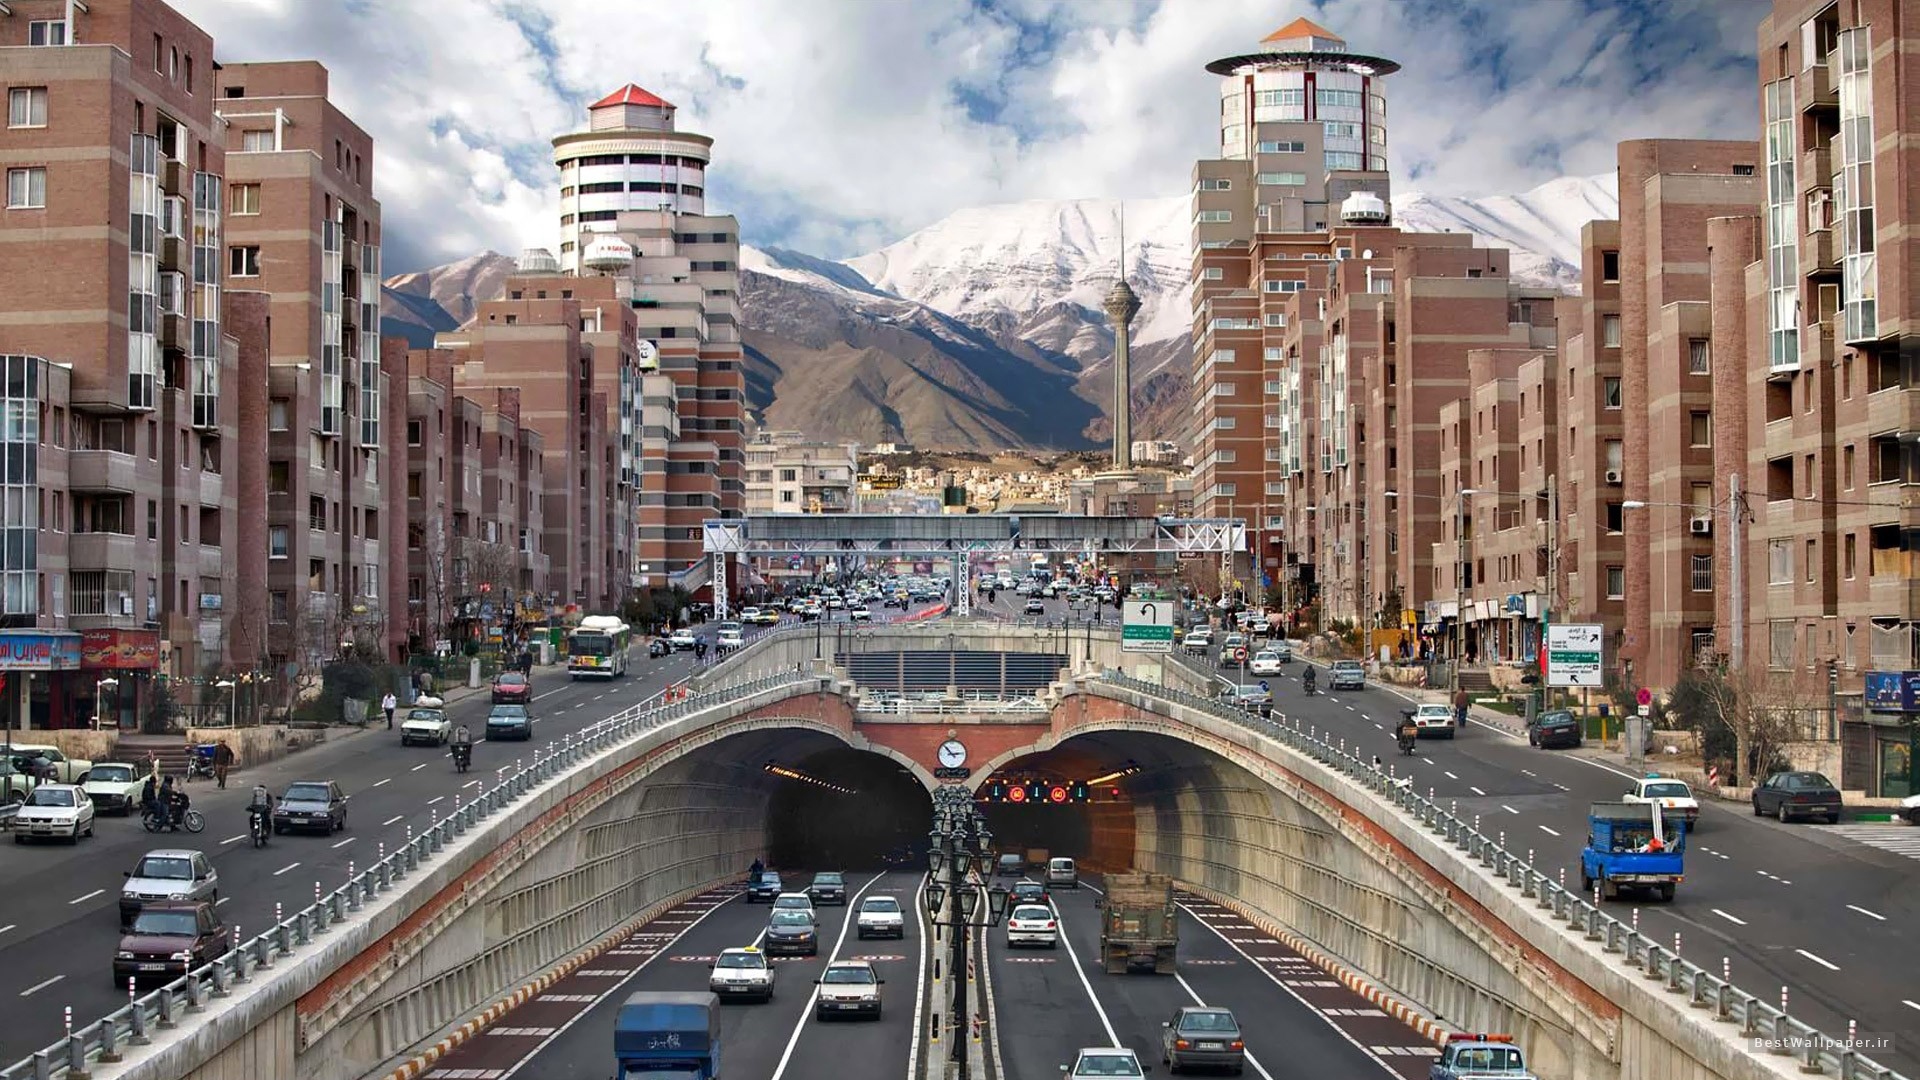 Tehran's different feature in a frame